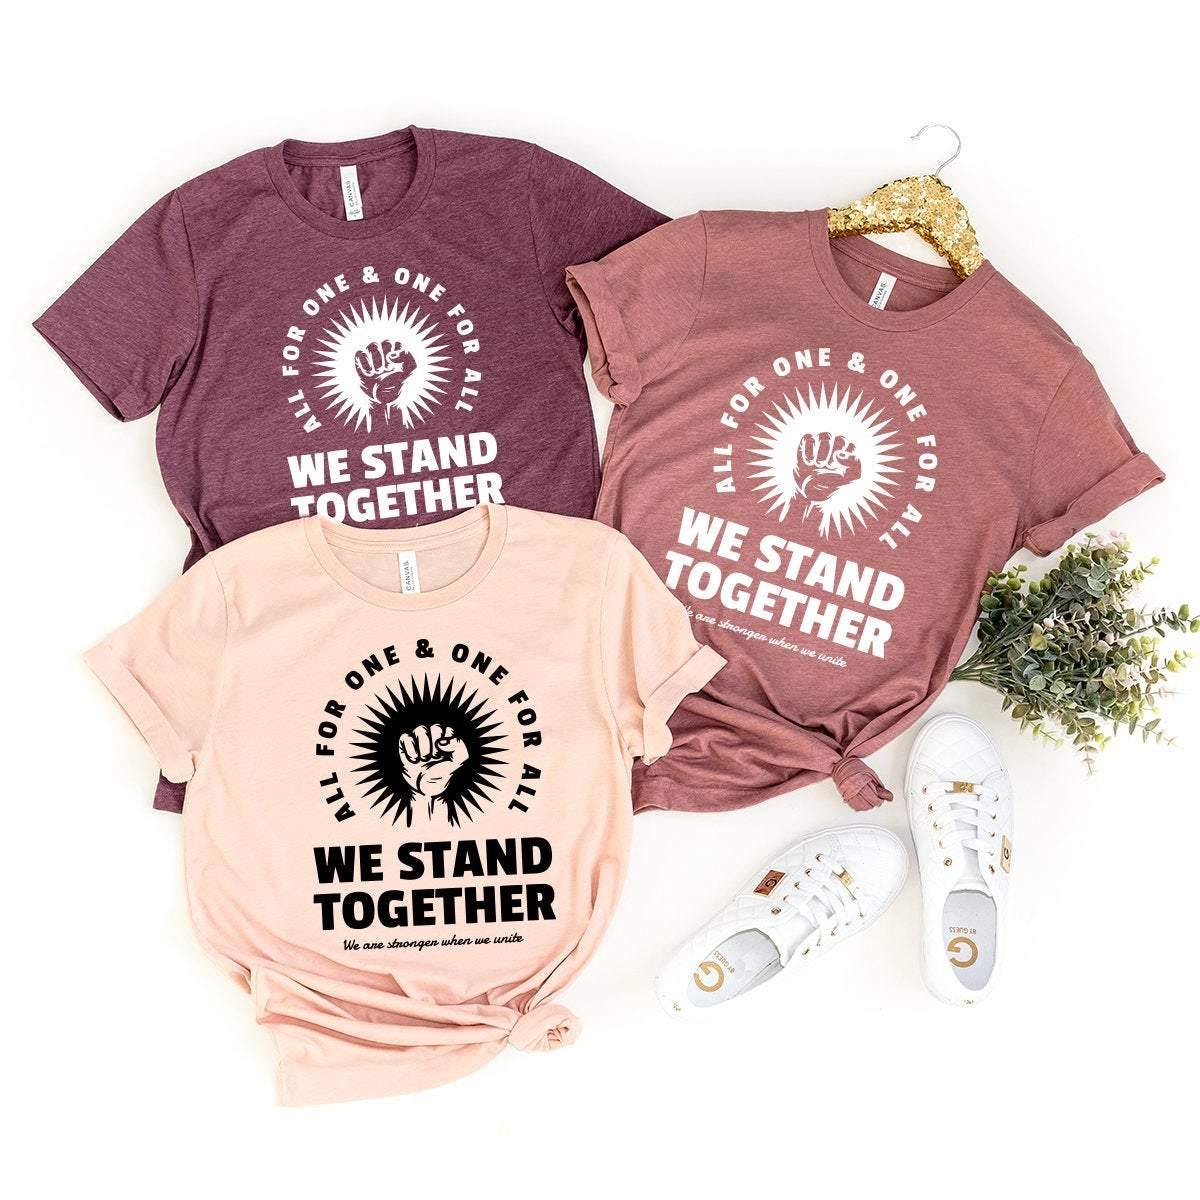 We Stand Together Shirt, Equality Shirt, Stop Racism Shirt,Unity In Diversity,All Lives Matter Shirt,All For One One For All Shirt - Fastdeliverytees.com